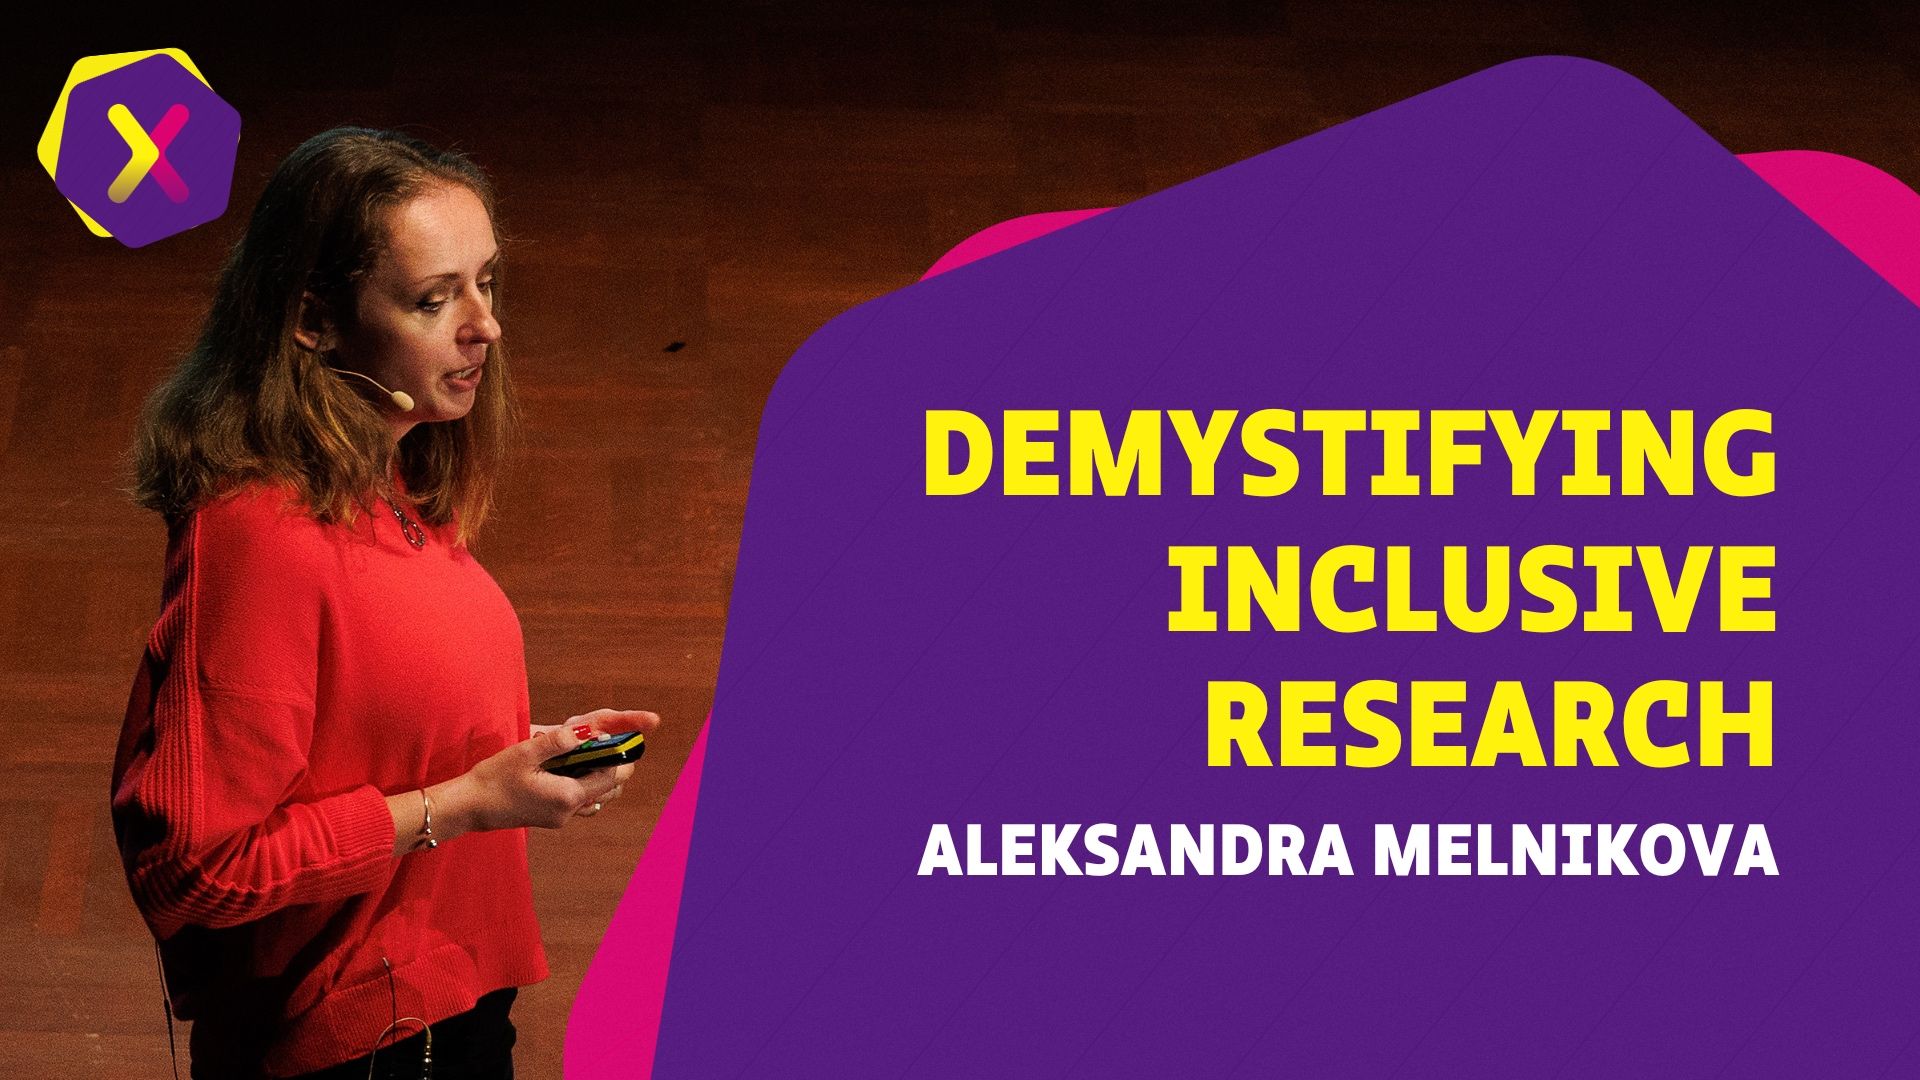 Demystifying Inclusive Research